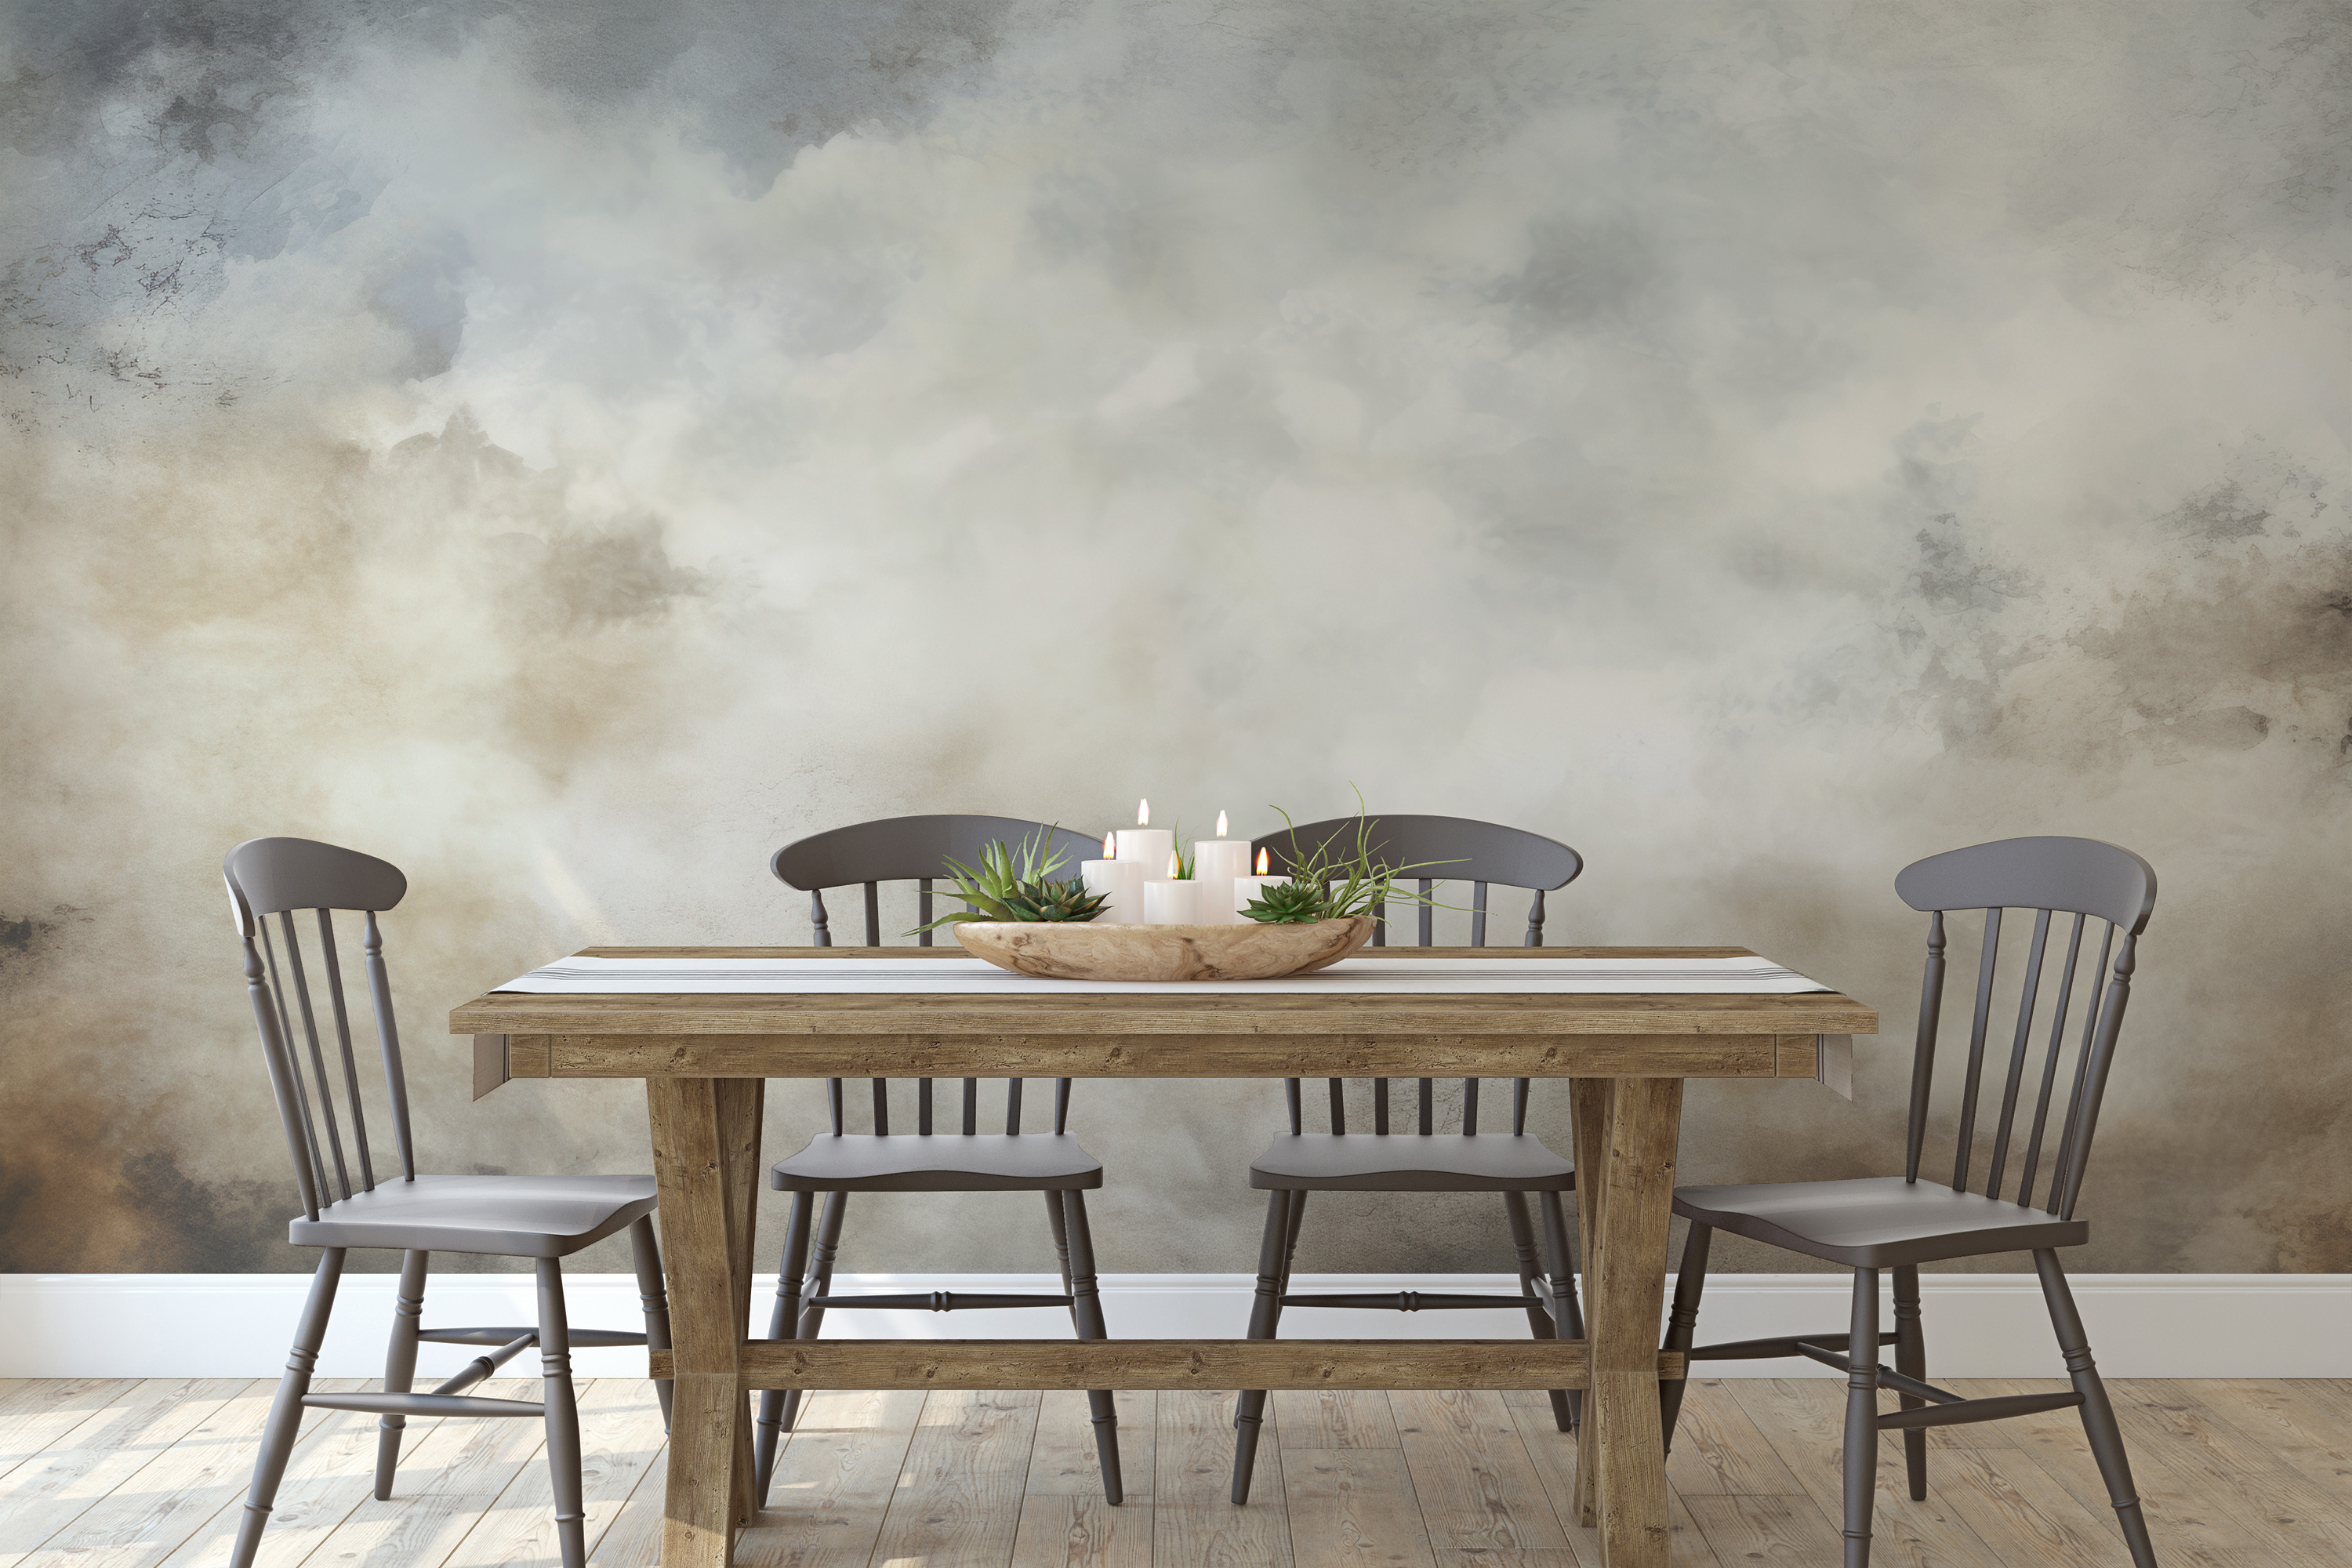 One of the Decomura photo wallpaper patterns from the "Concrete&Clouds" collection